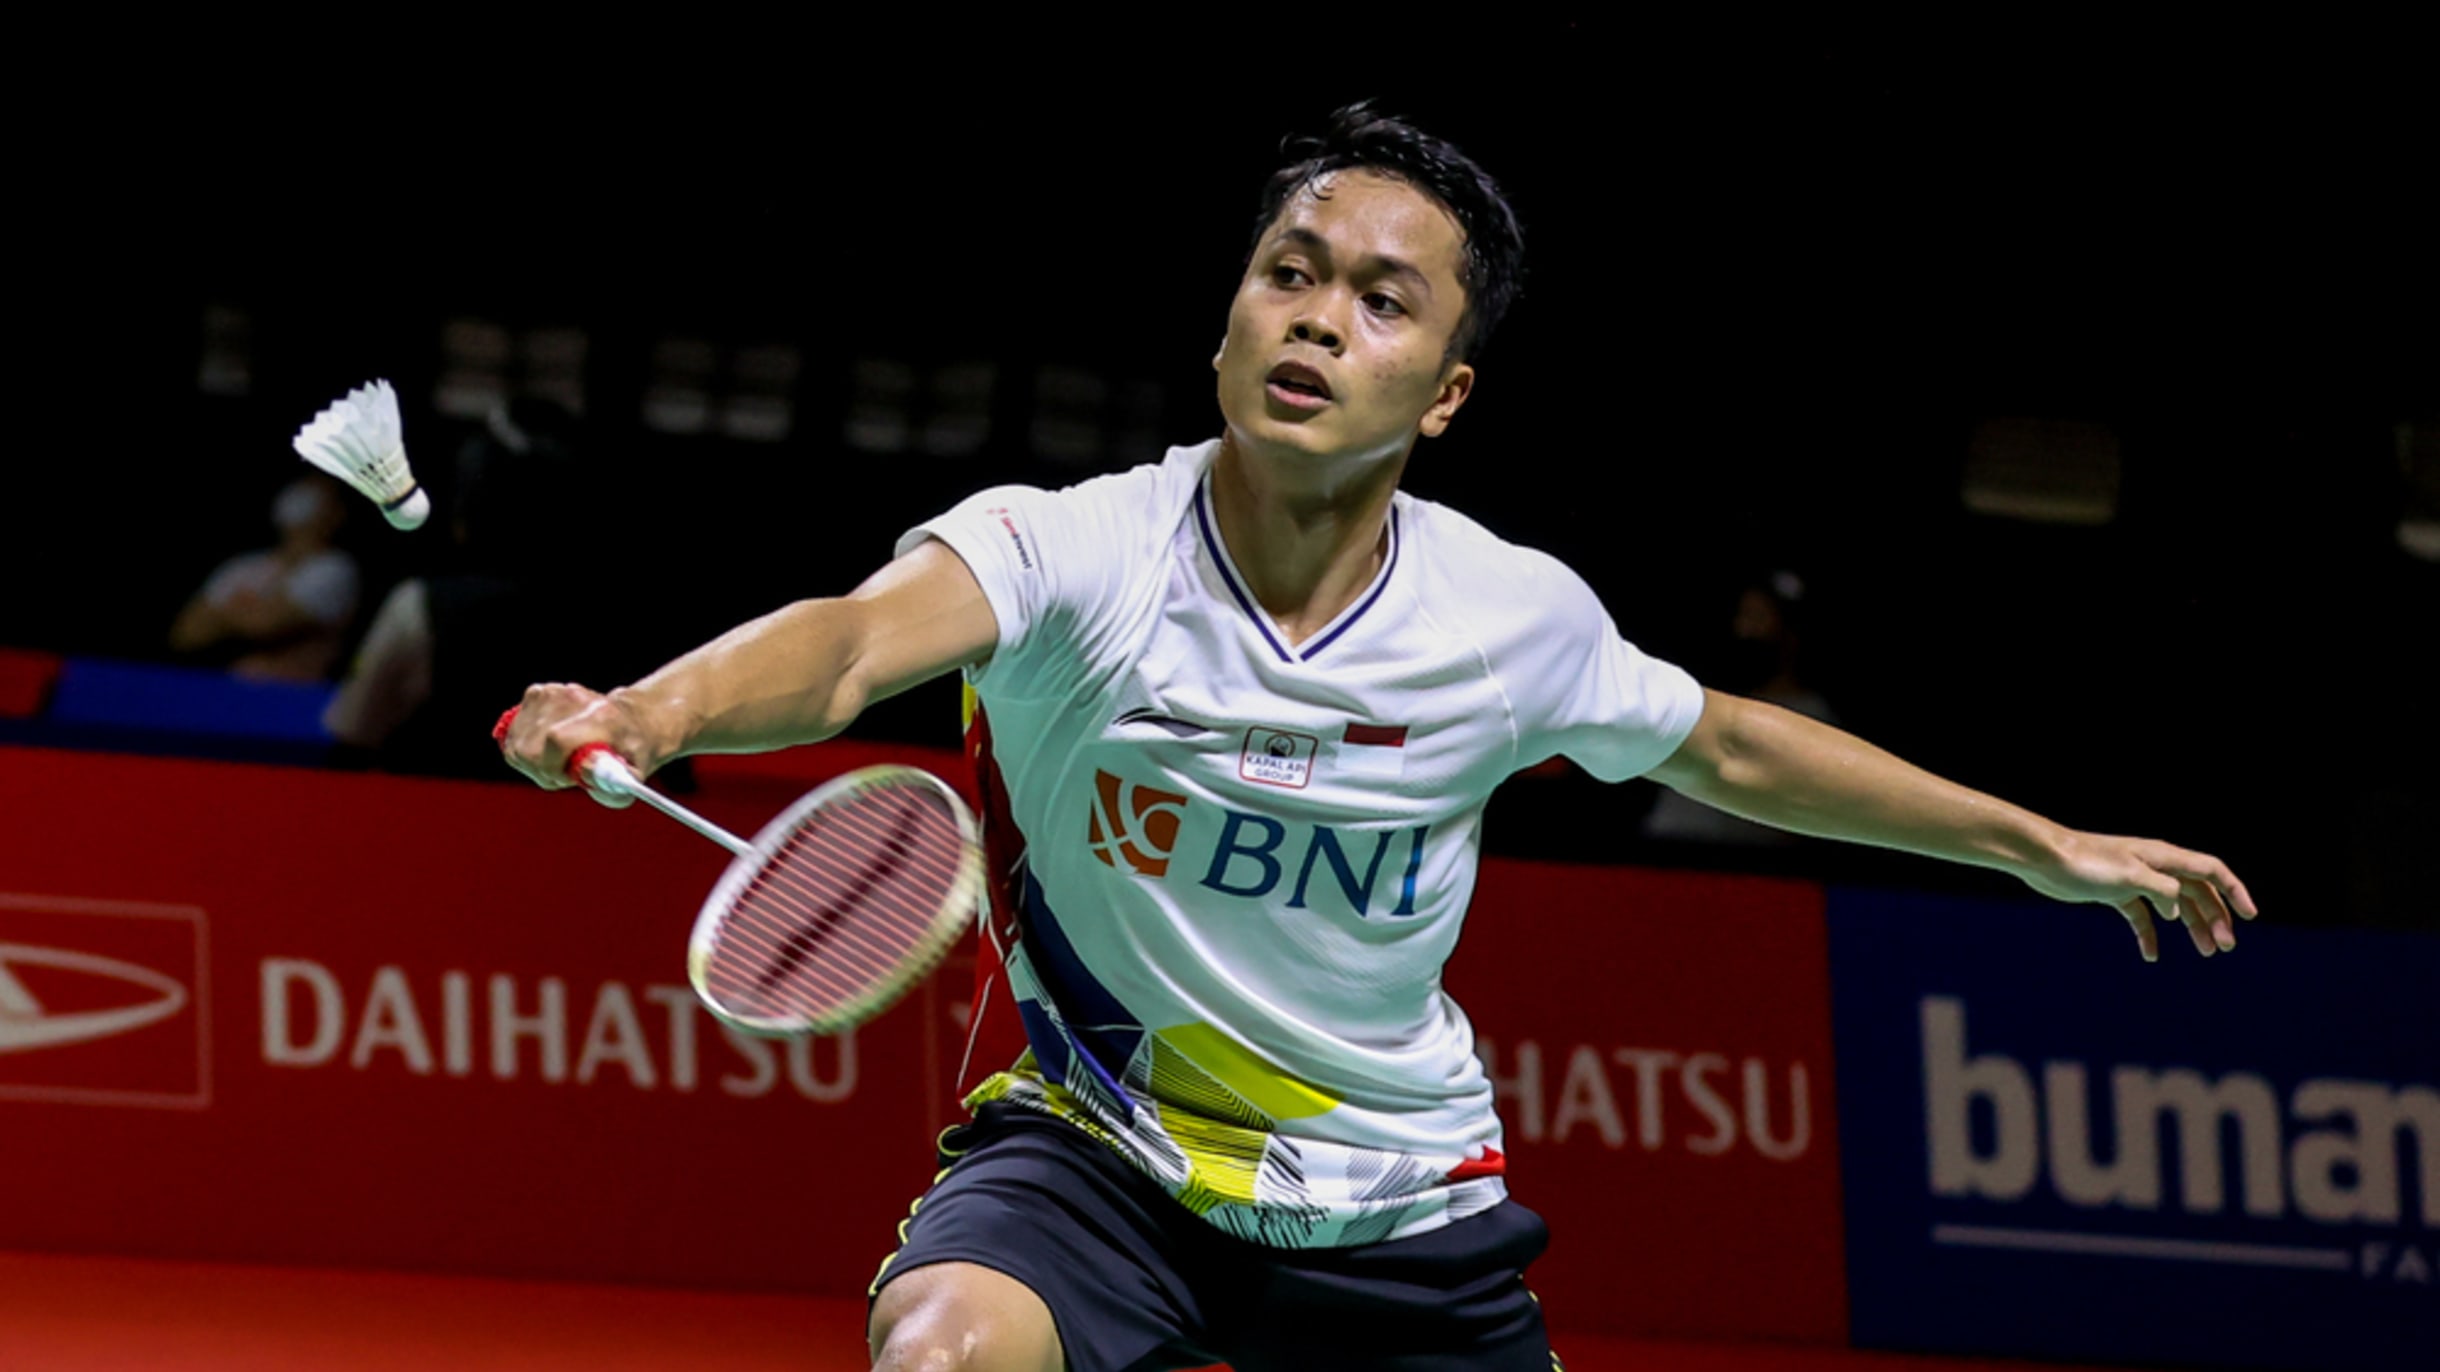 Anthony Ginting eliminated from Indonesia Masters 2021 as Jonatan Christie and Viktor Axelsen through to second round